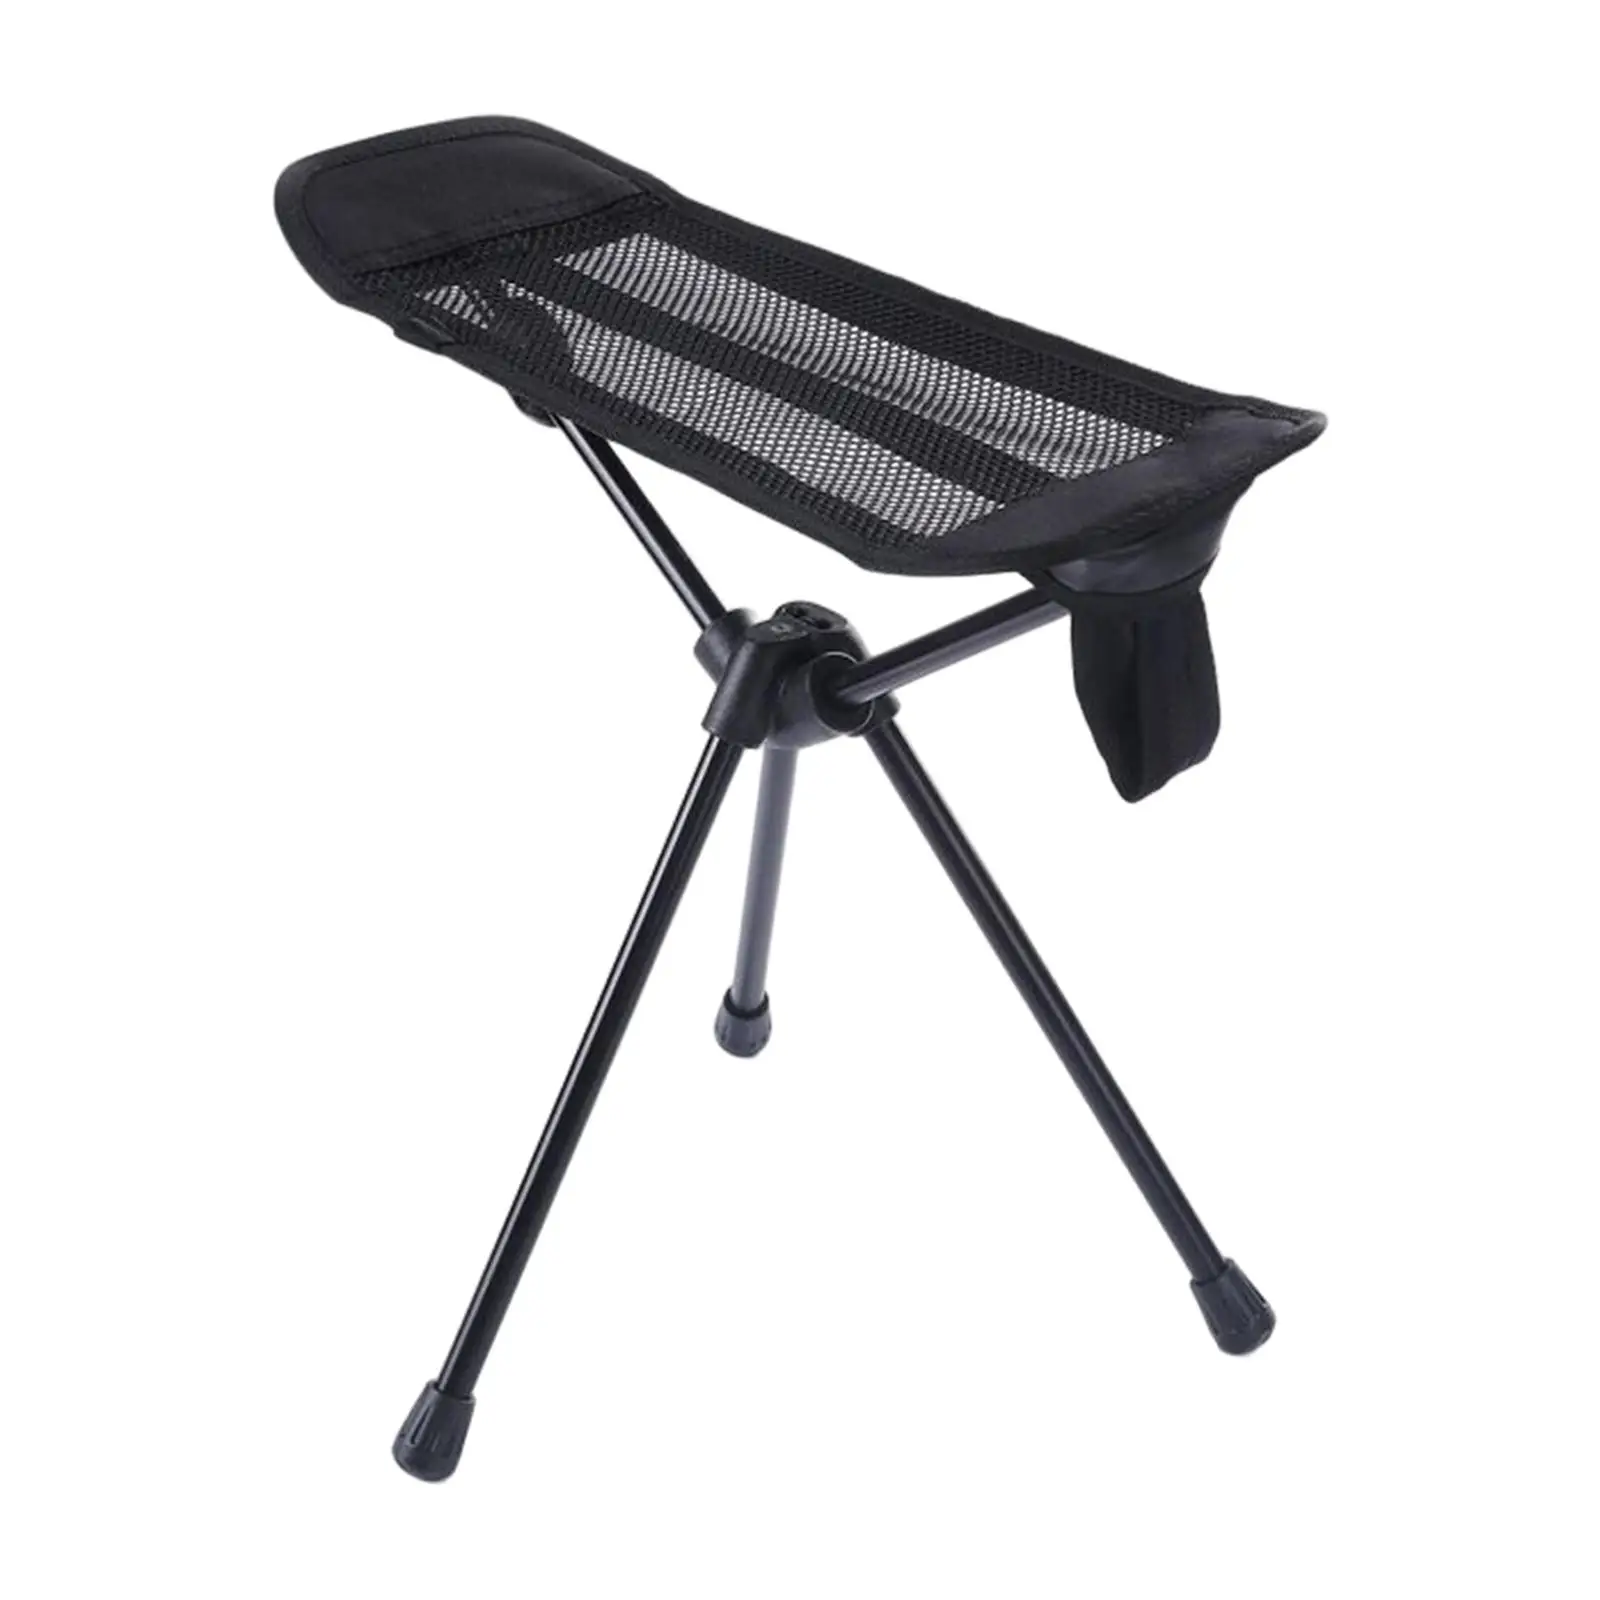 Portable Stool Collapsible Footstool For Travel Beach Folding Chair Fishing Outdoor BBQ Camping Chair Recliner Foot Rest